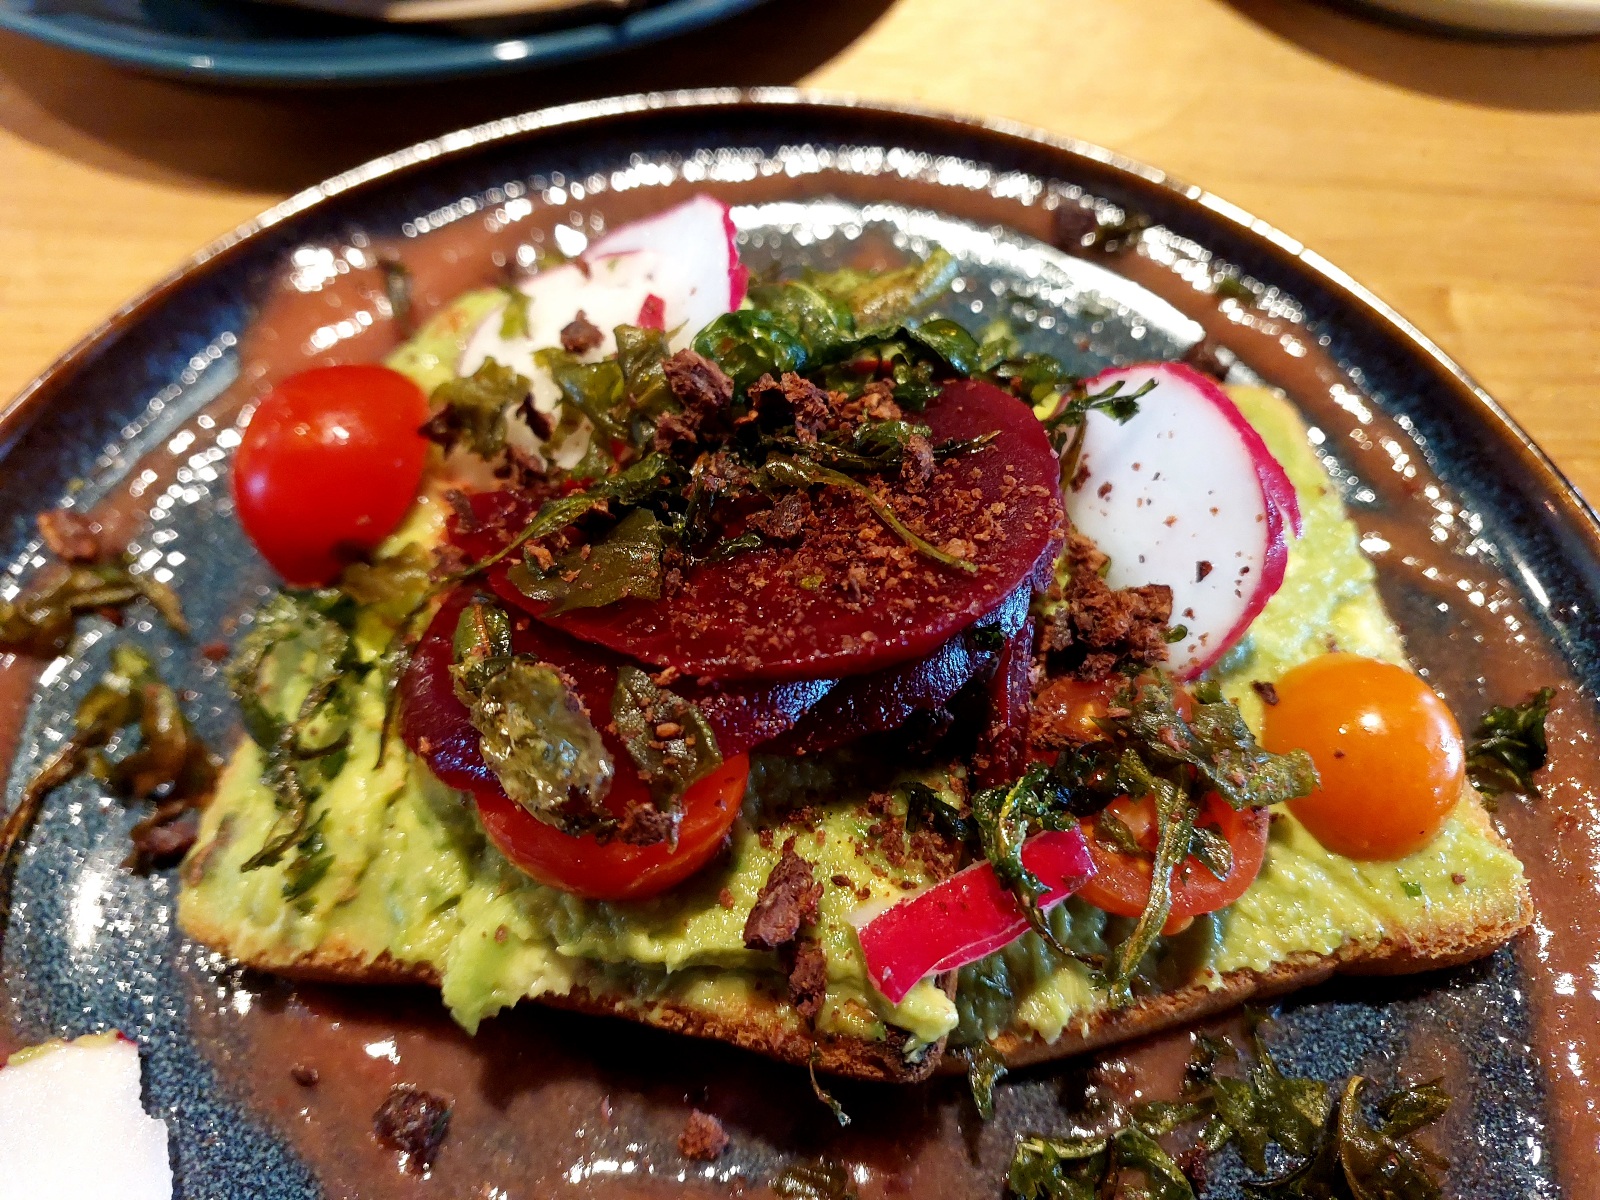 Smashed avo with beetroot and a rhubarb compote